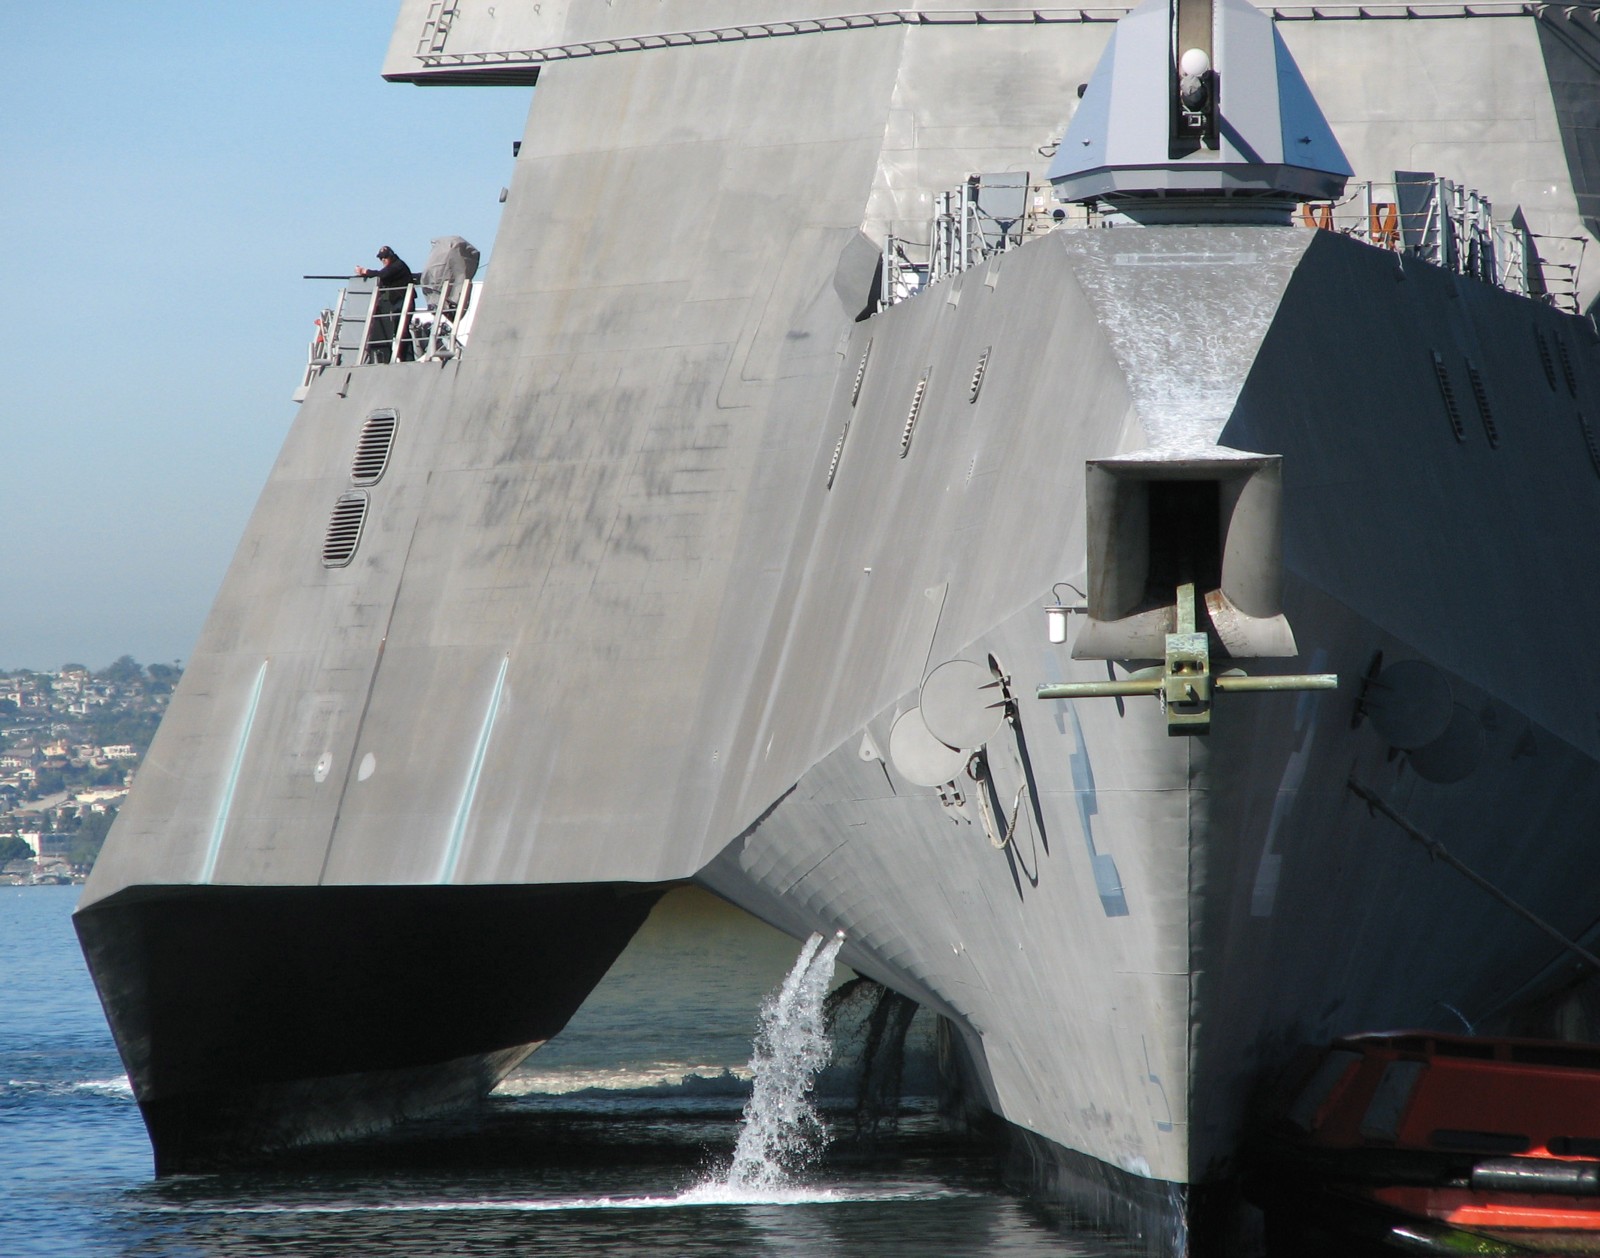 lcs-2 uss independence littoral combat ship us navy class 21a